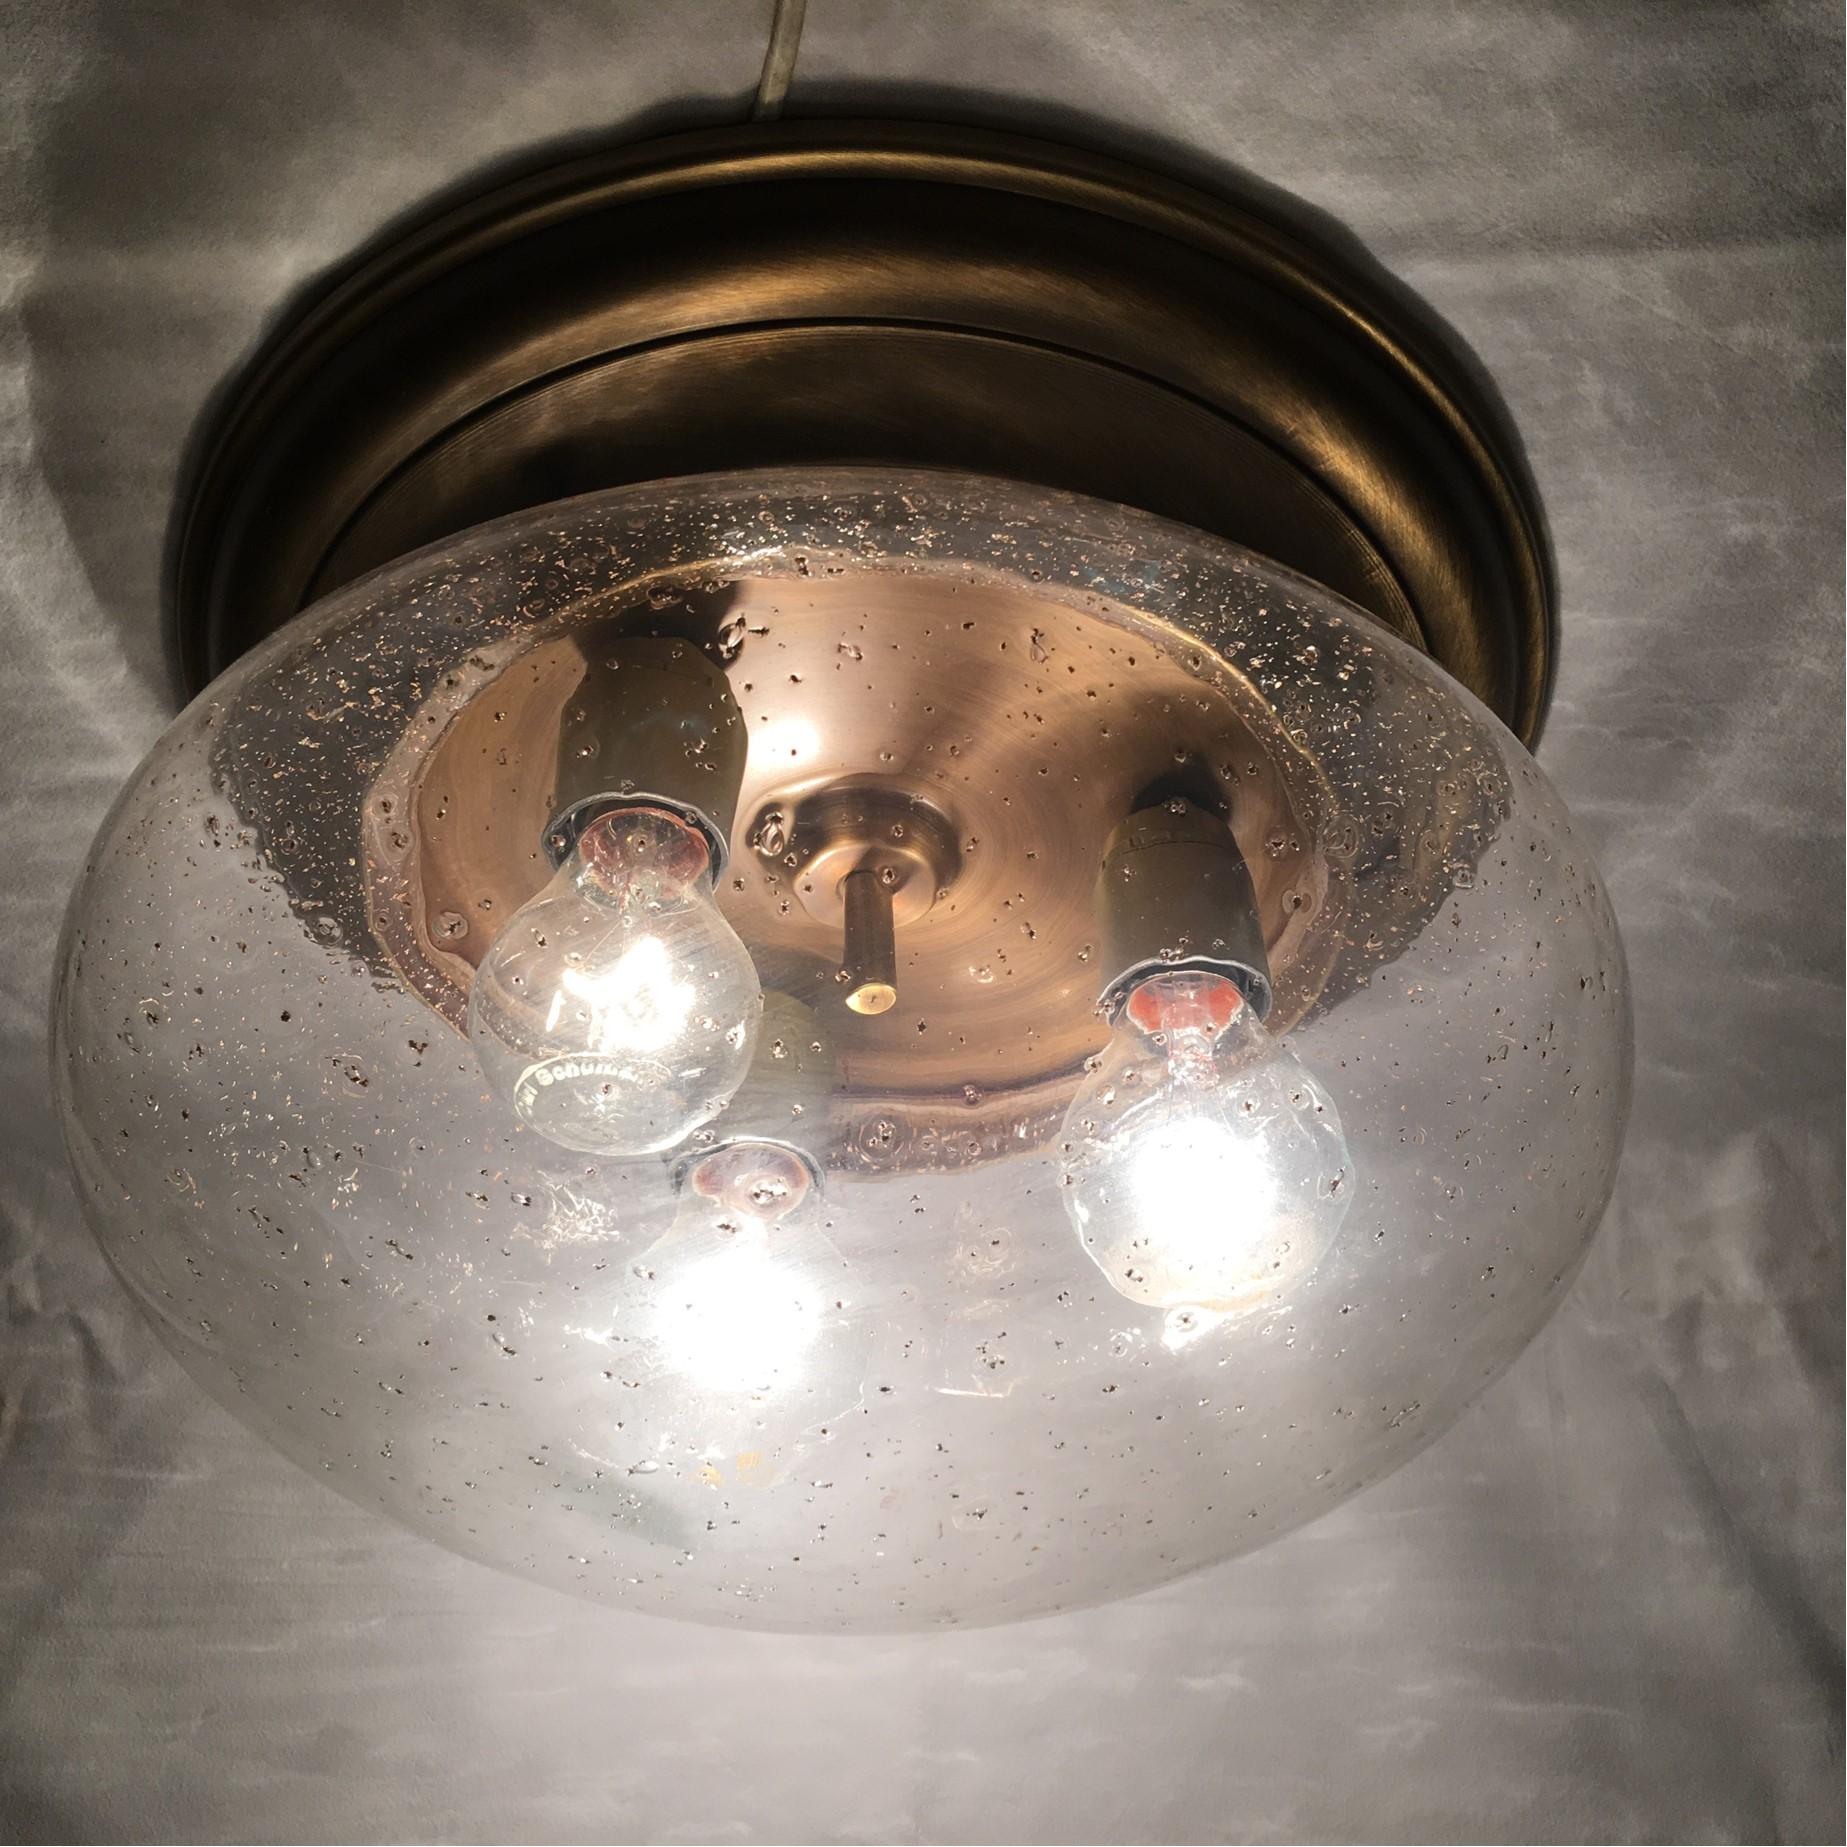 Decorated with small glass melding in the dome this pretty brass and glass dome flush mount lamp is rewired to meet US Standards. It requires 3 E27 European Edison bulbs for a beautiful lighting effect.